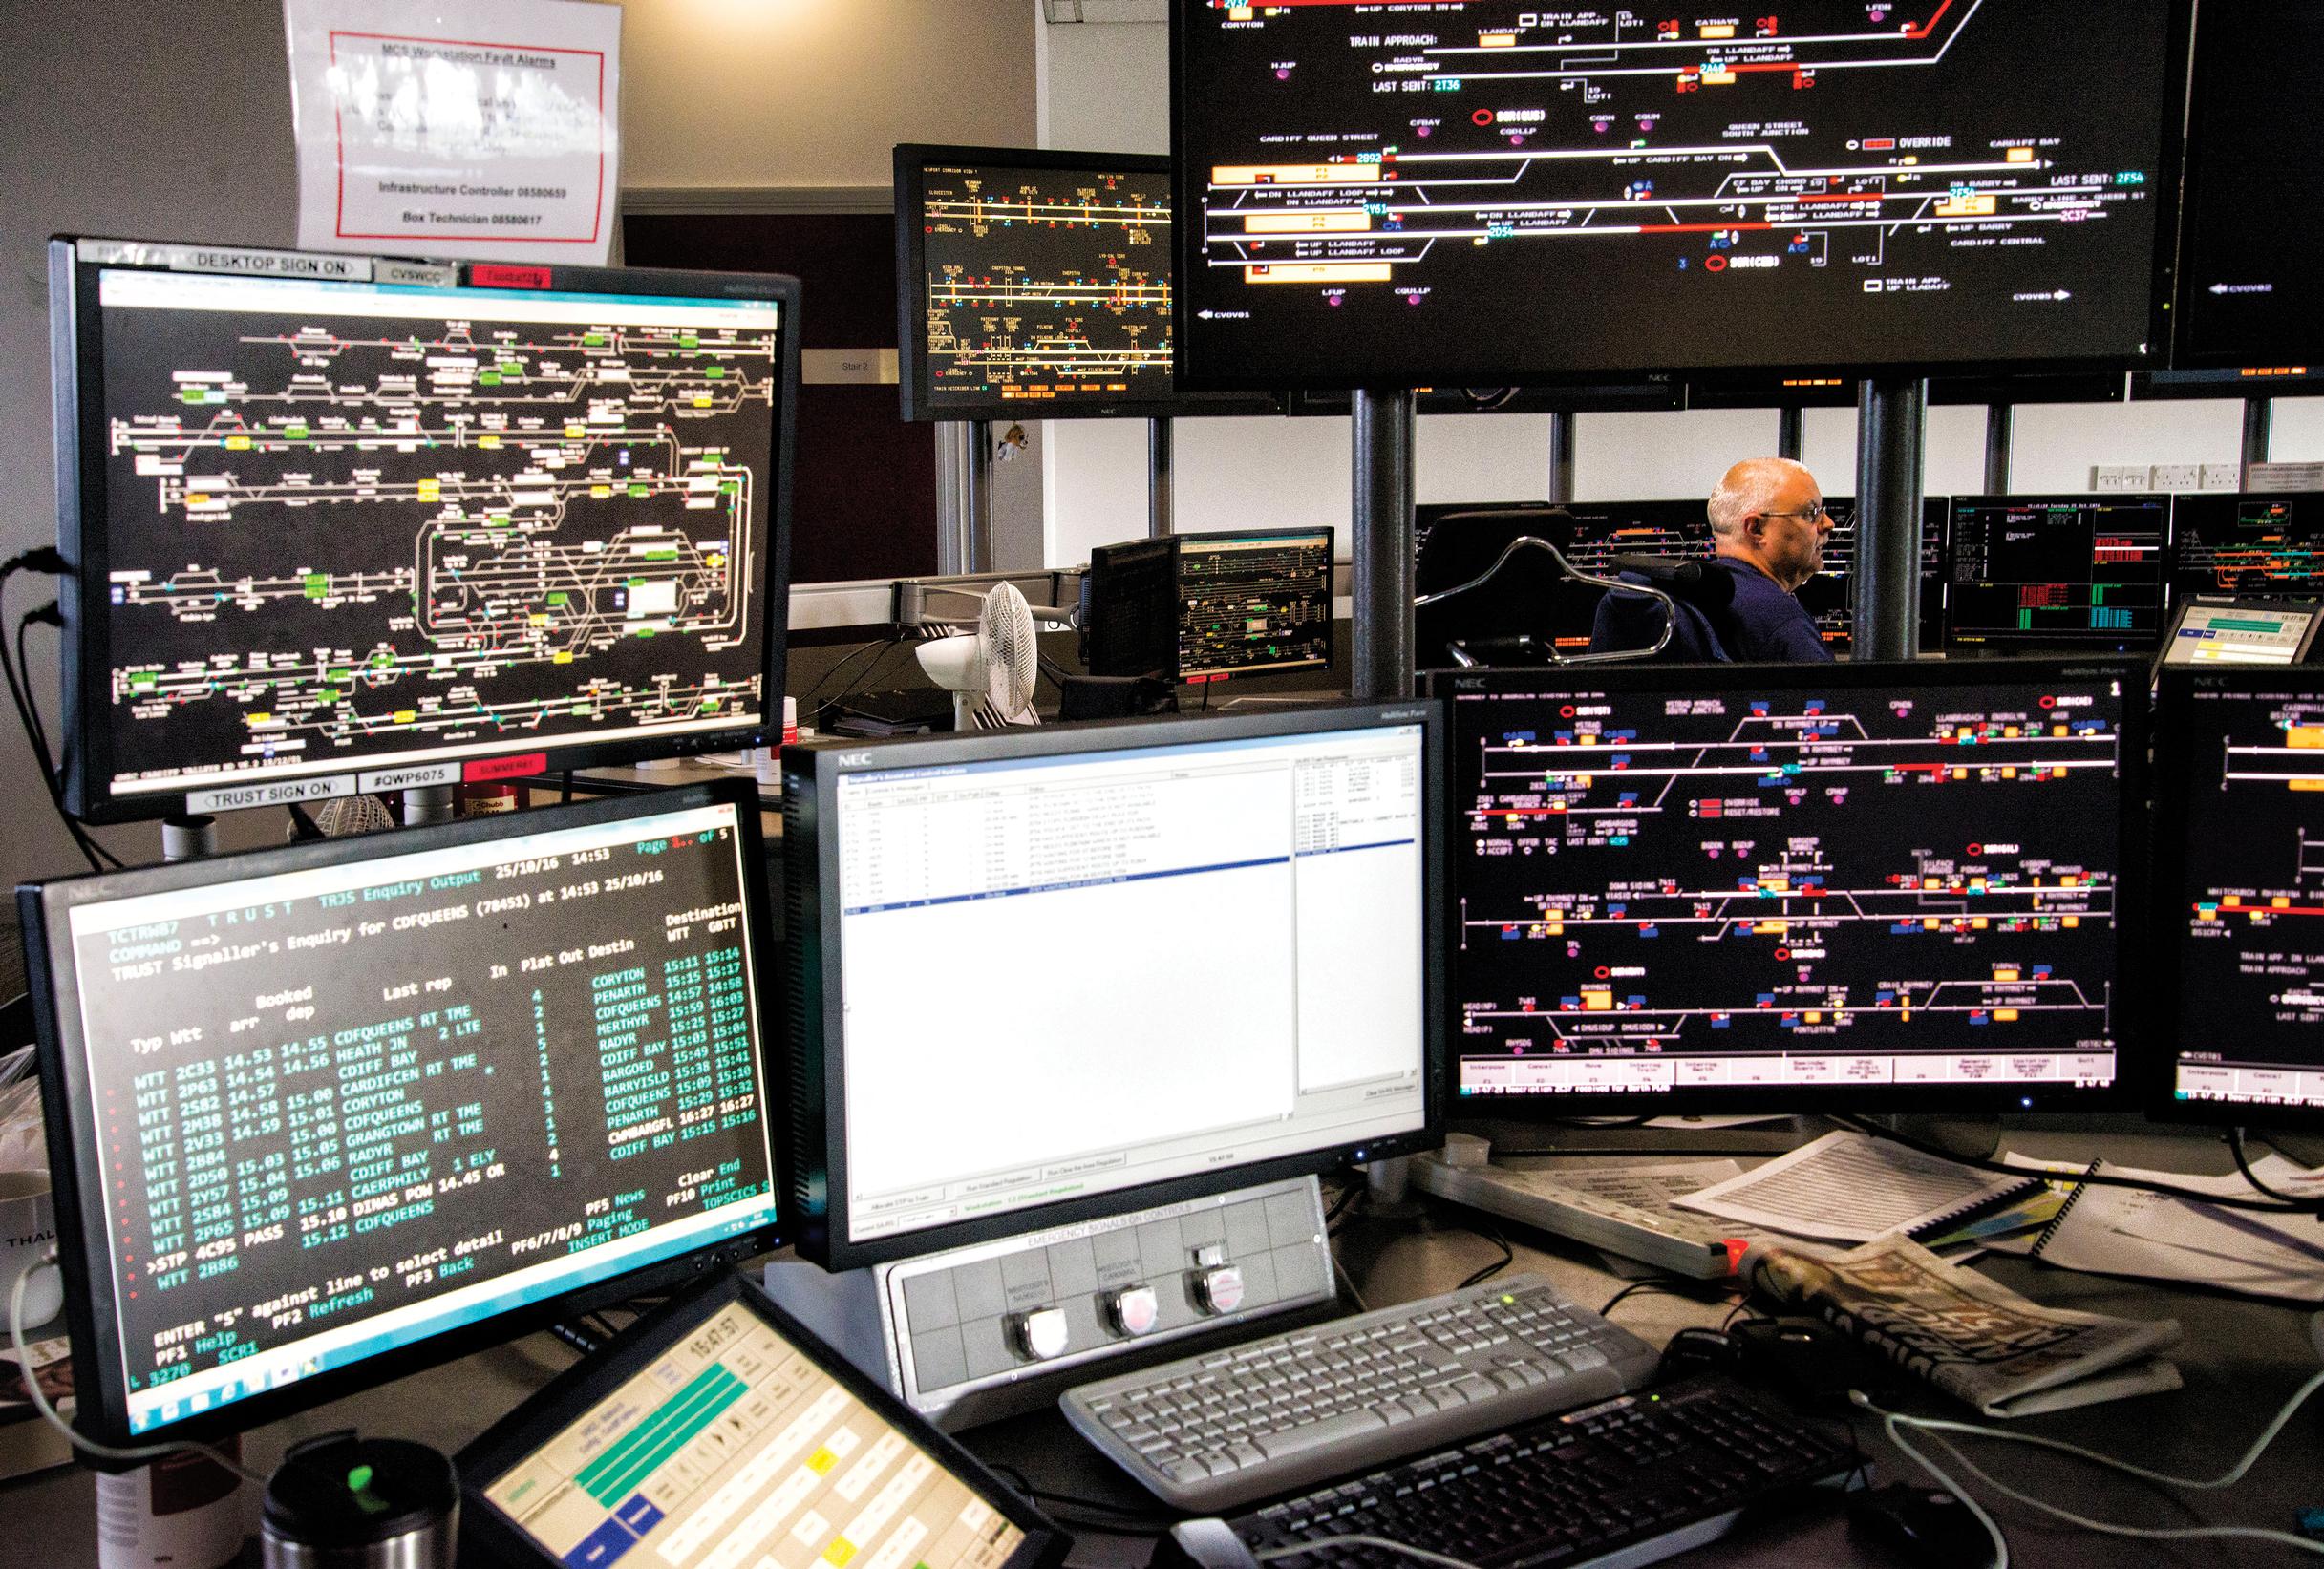 Each of Network Rail’s 12 new Rail Operating Centres will control huge chunks of the rail network. NR has taken steps to mitigate the risk of system failures